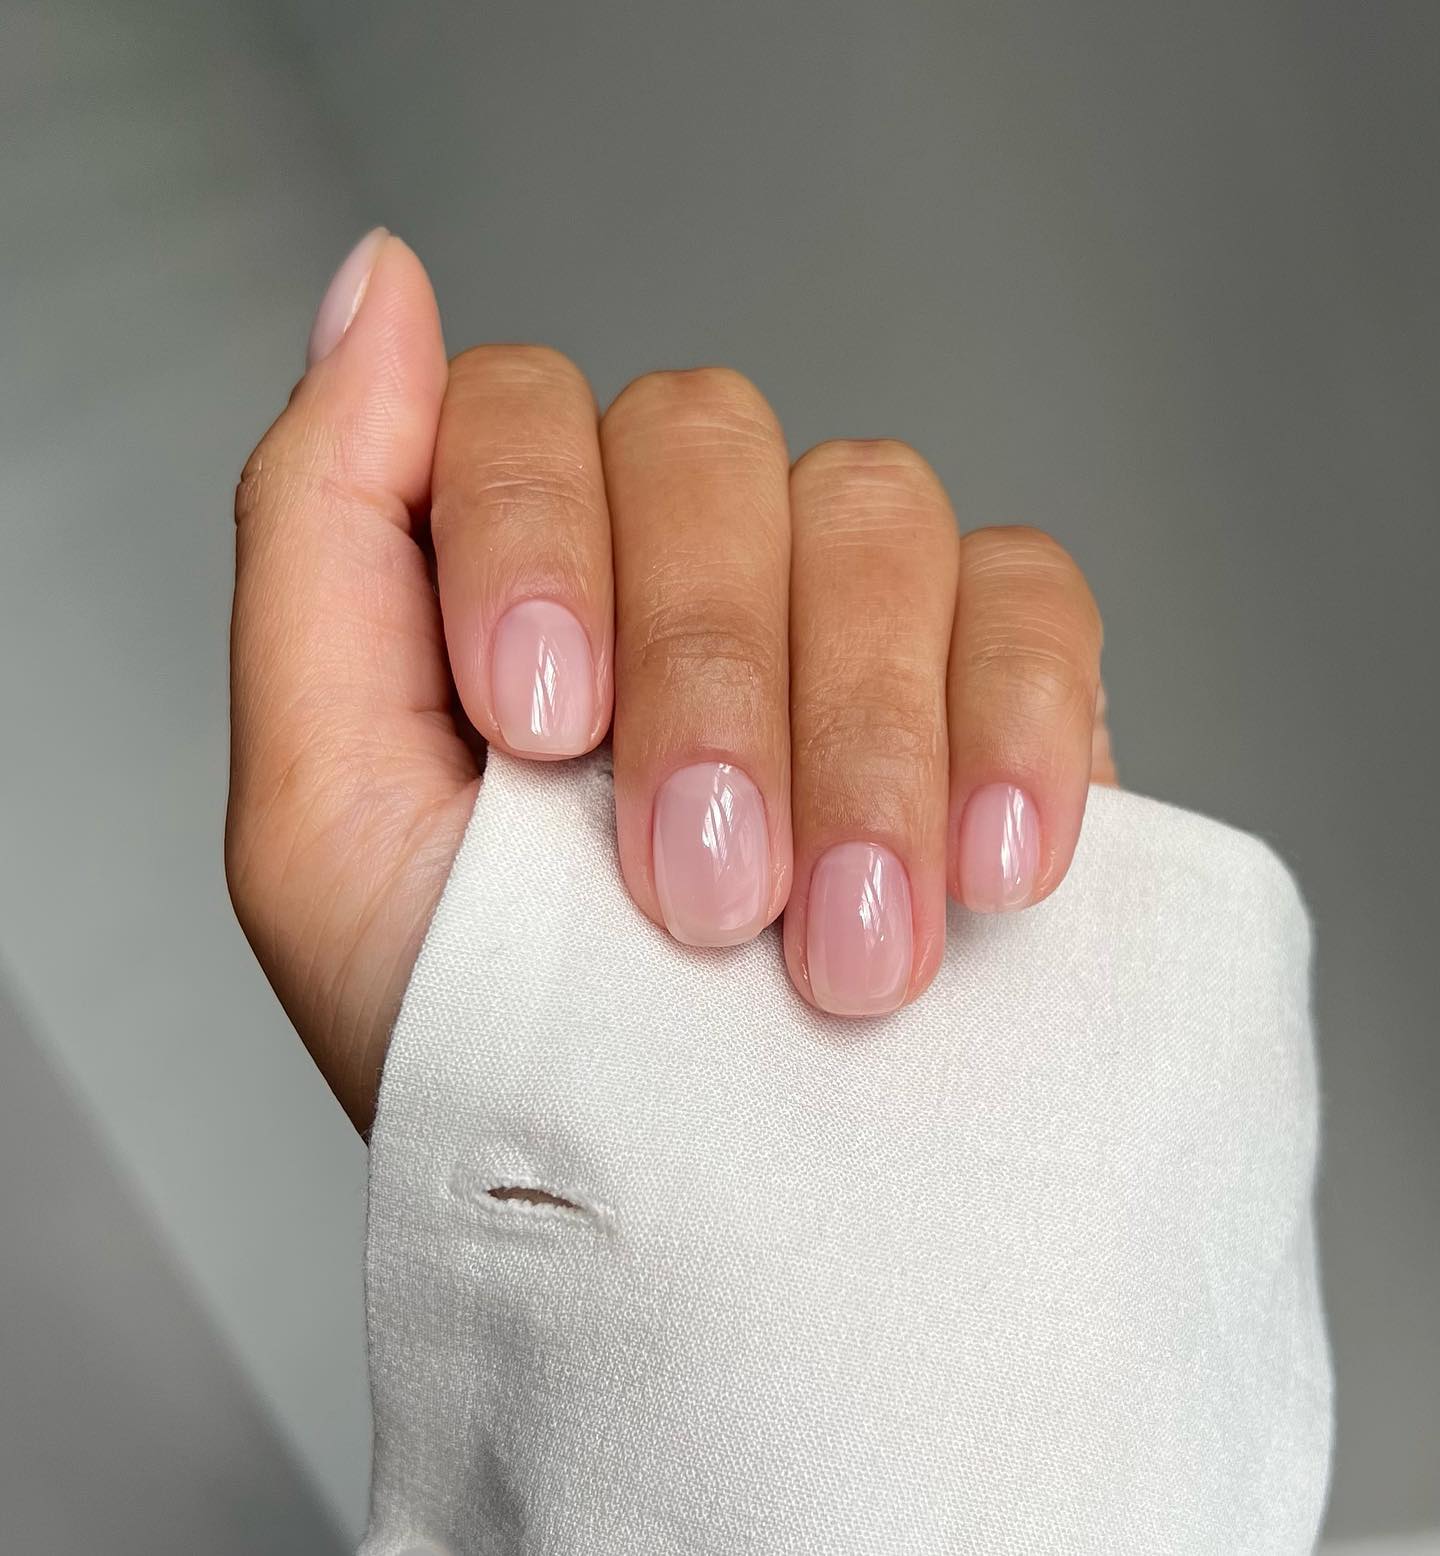 How to do natural nails for a clean-looking expensive manicure